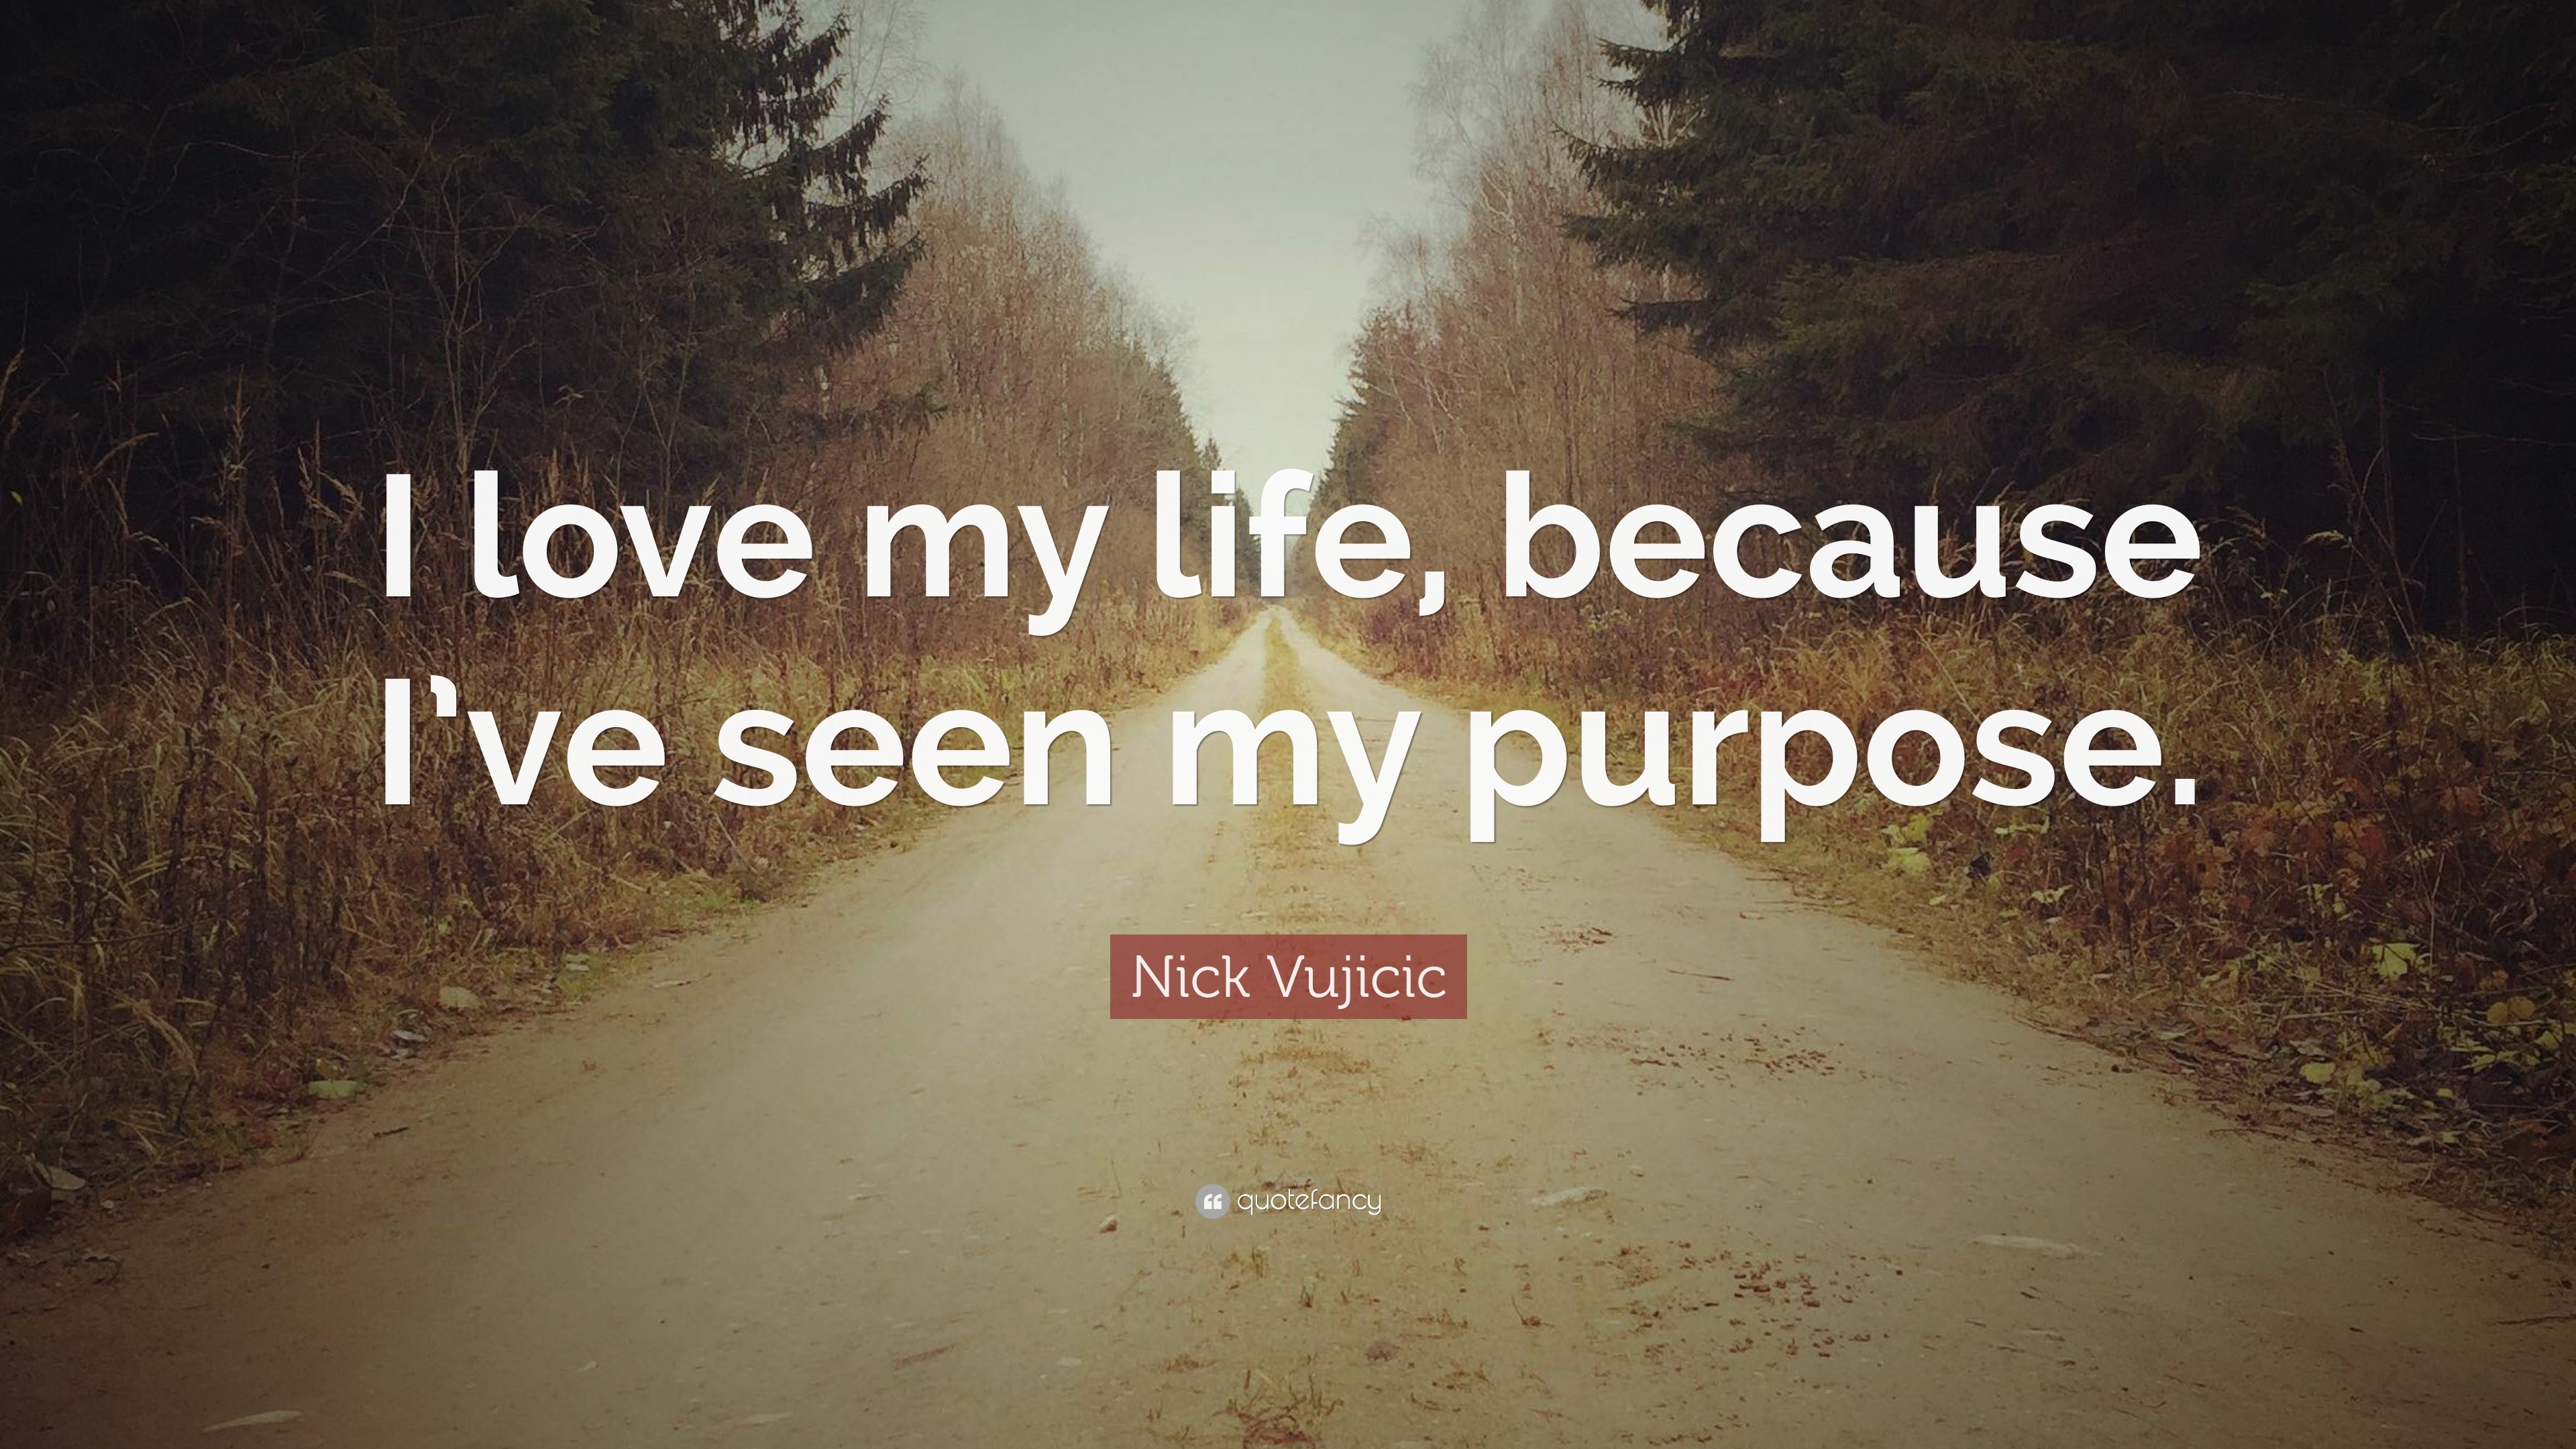 Nick Vujicic Quote “I love my life because I ve seen my